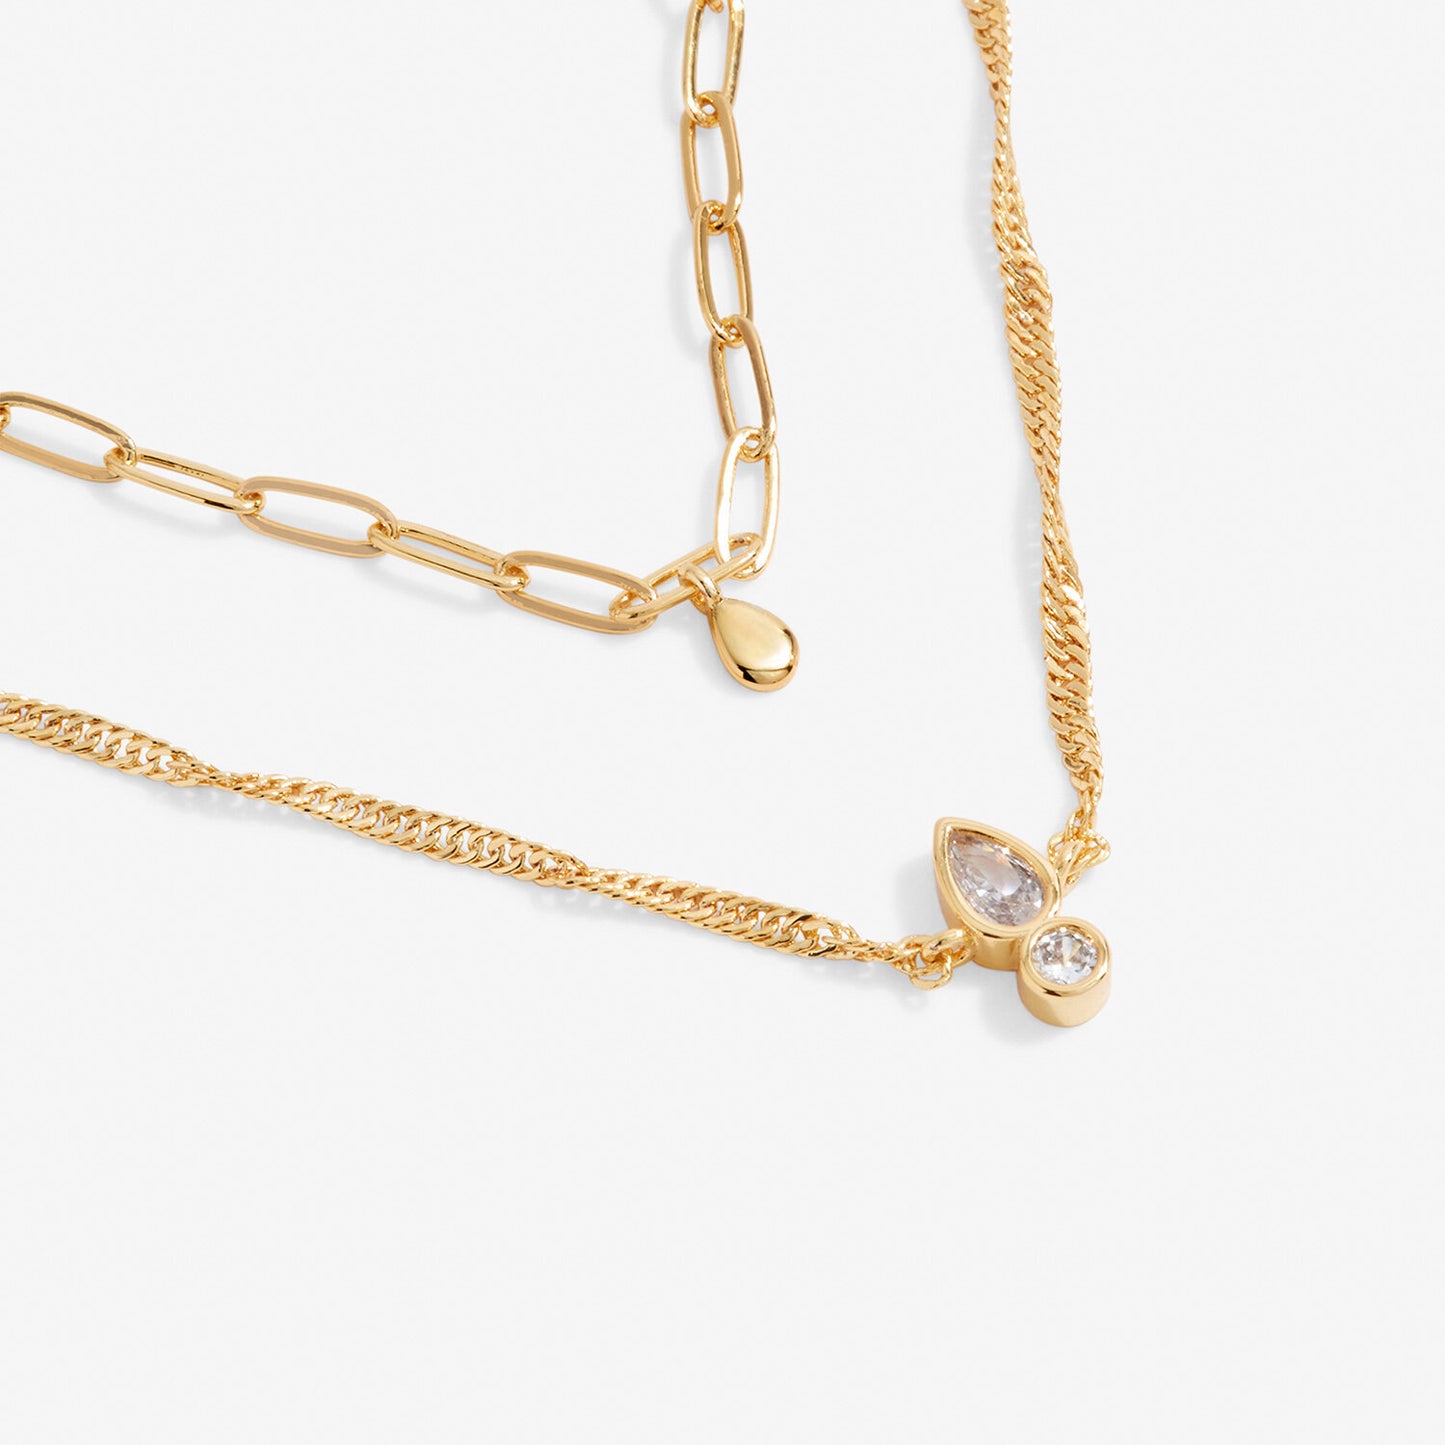 Stacks Of Style Organic Shape Necklace in Gold-Tone Plating